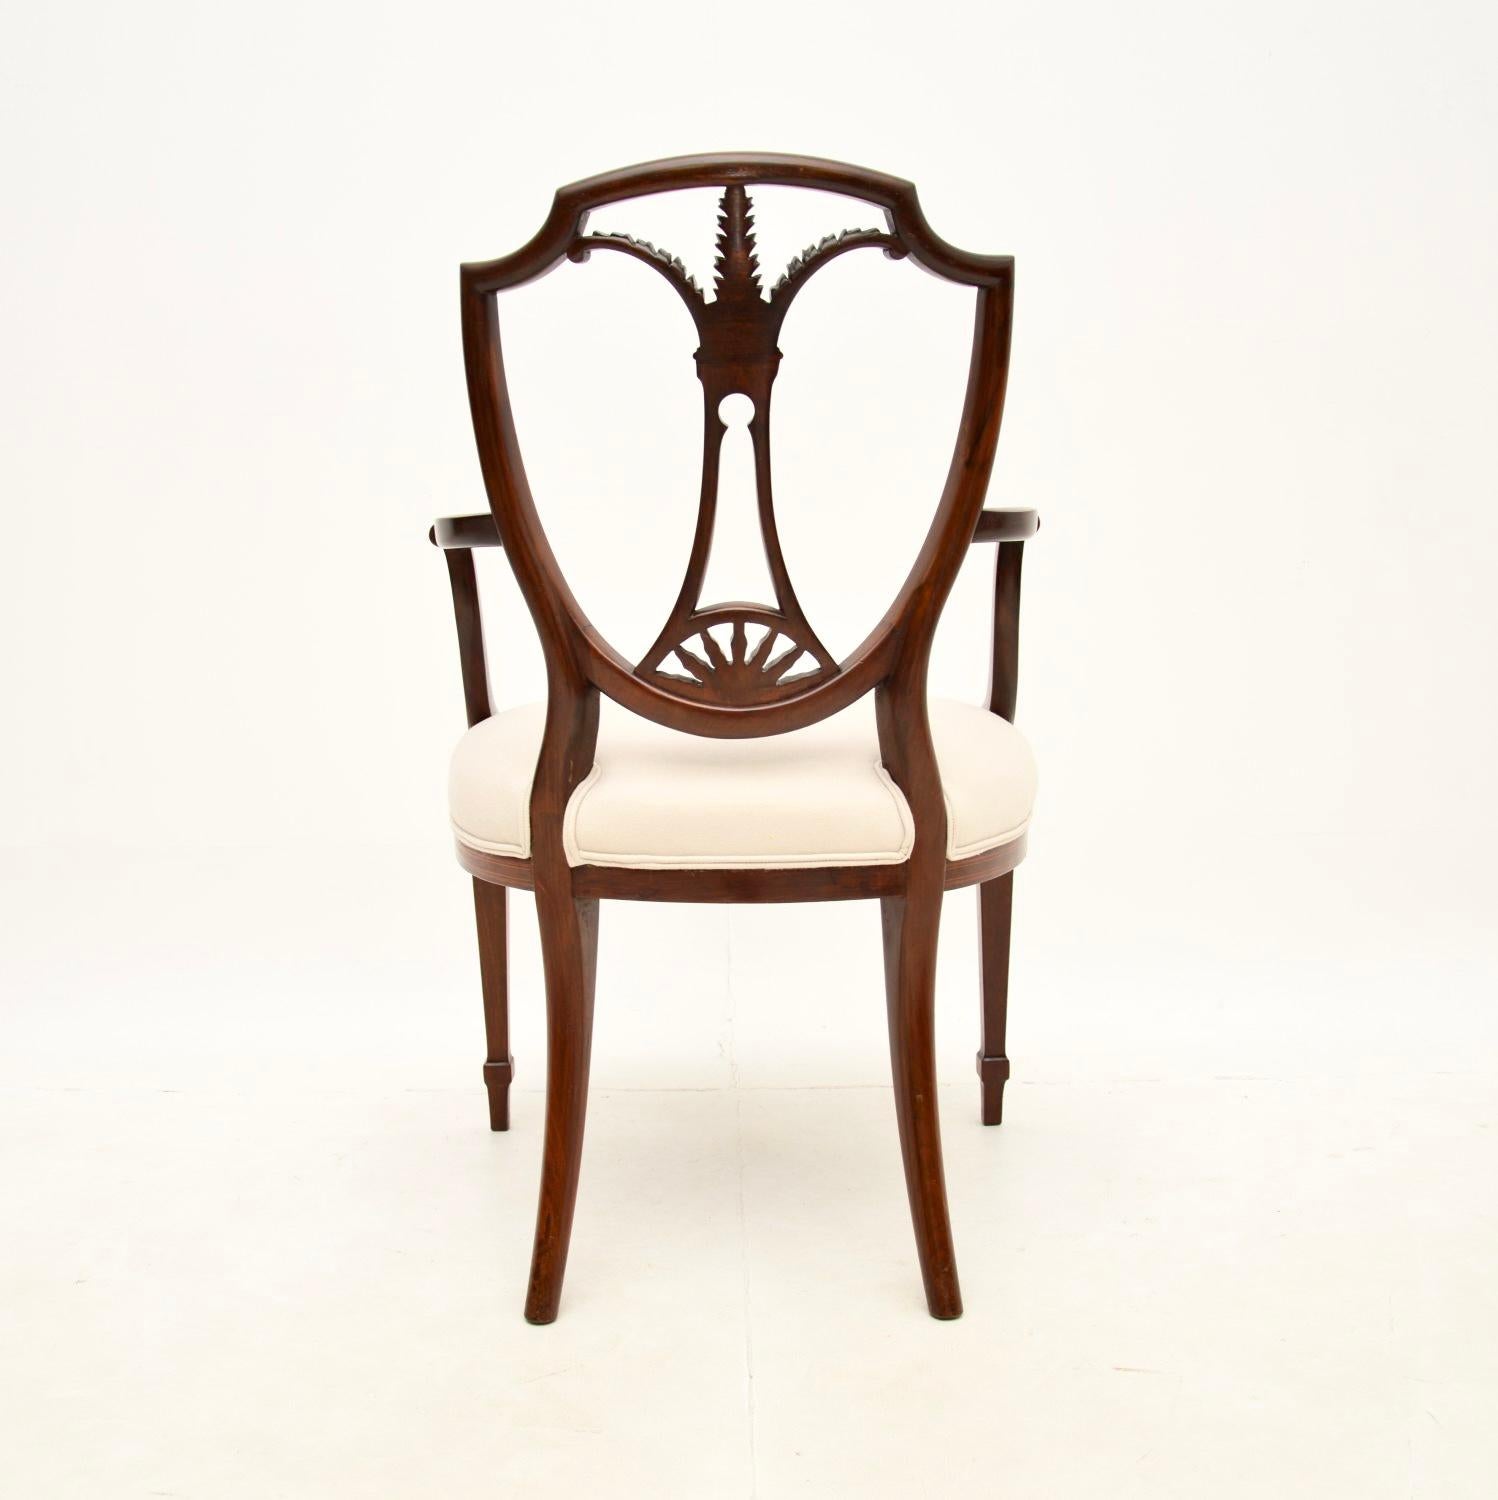 British Antique Inlaid Sheraton Style Carver Armchair For Sale